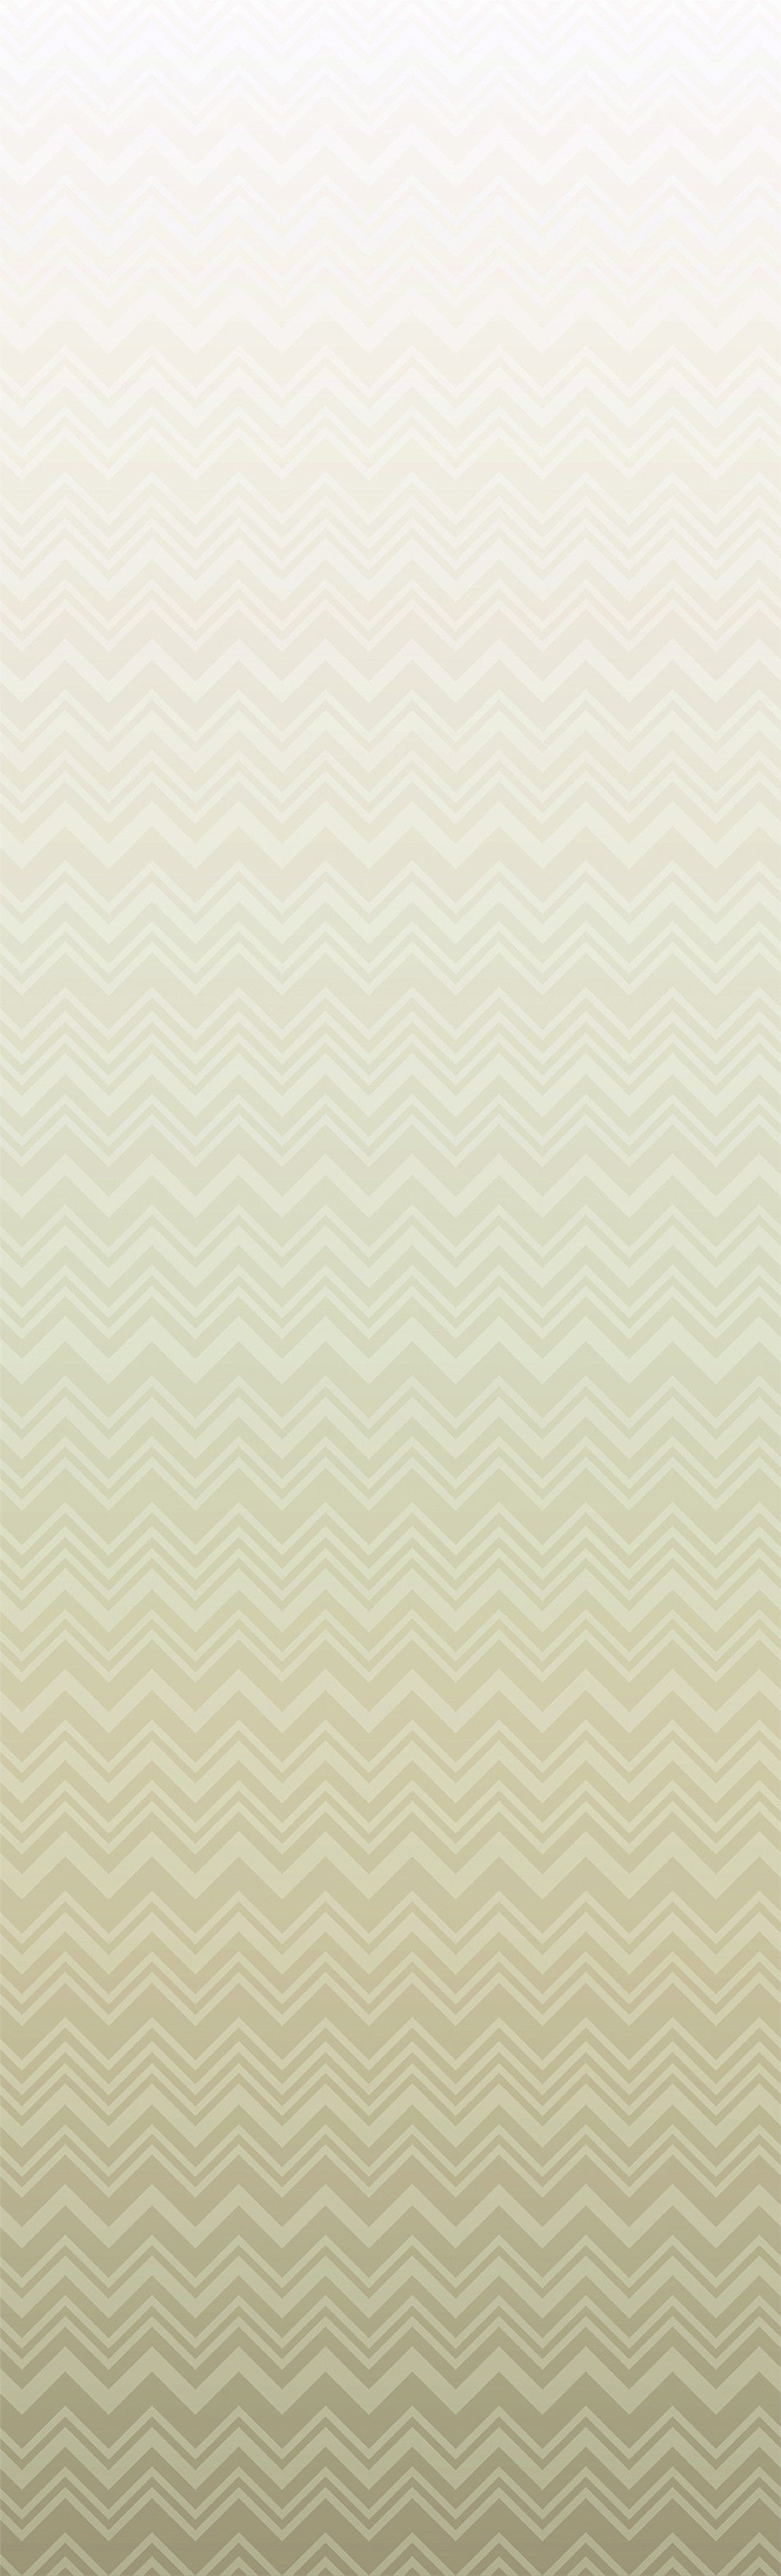 Missoni Home Wallcoverings 04 Iconic Shades 10391